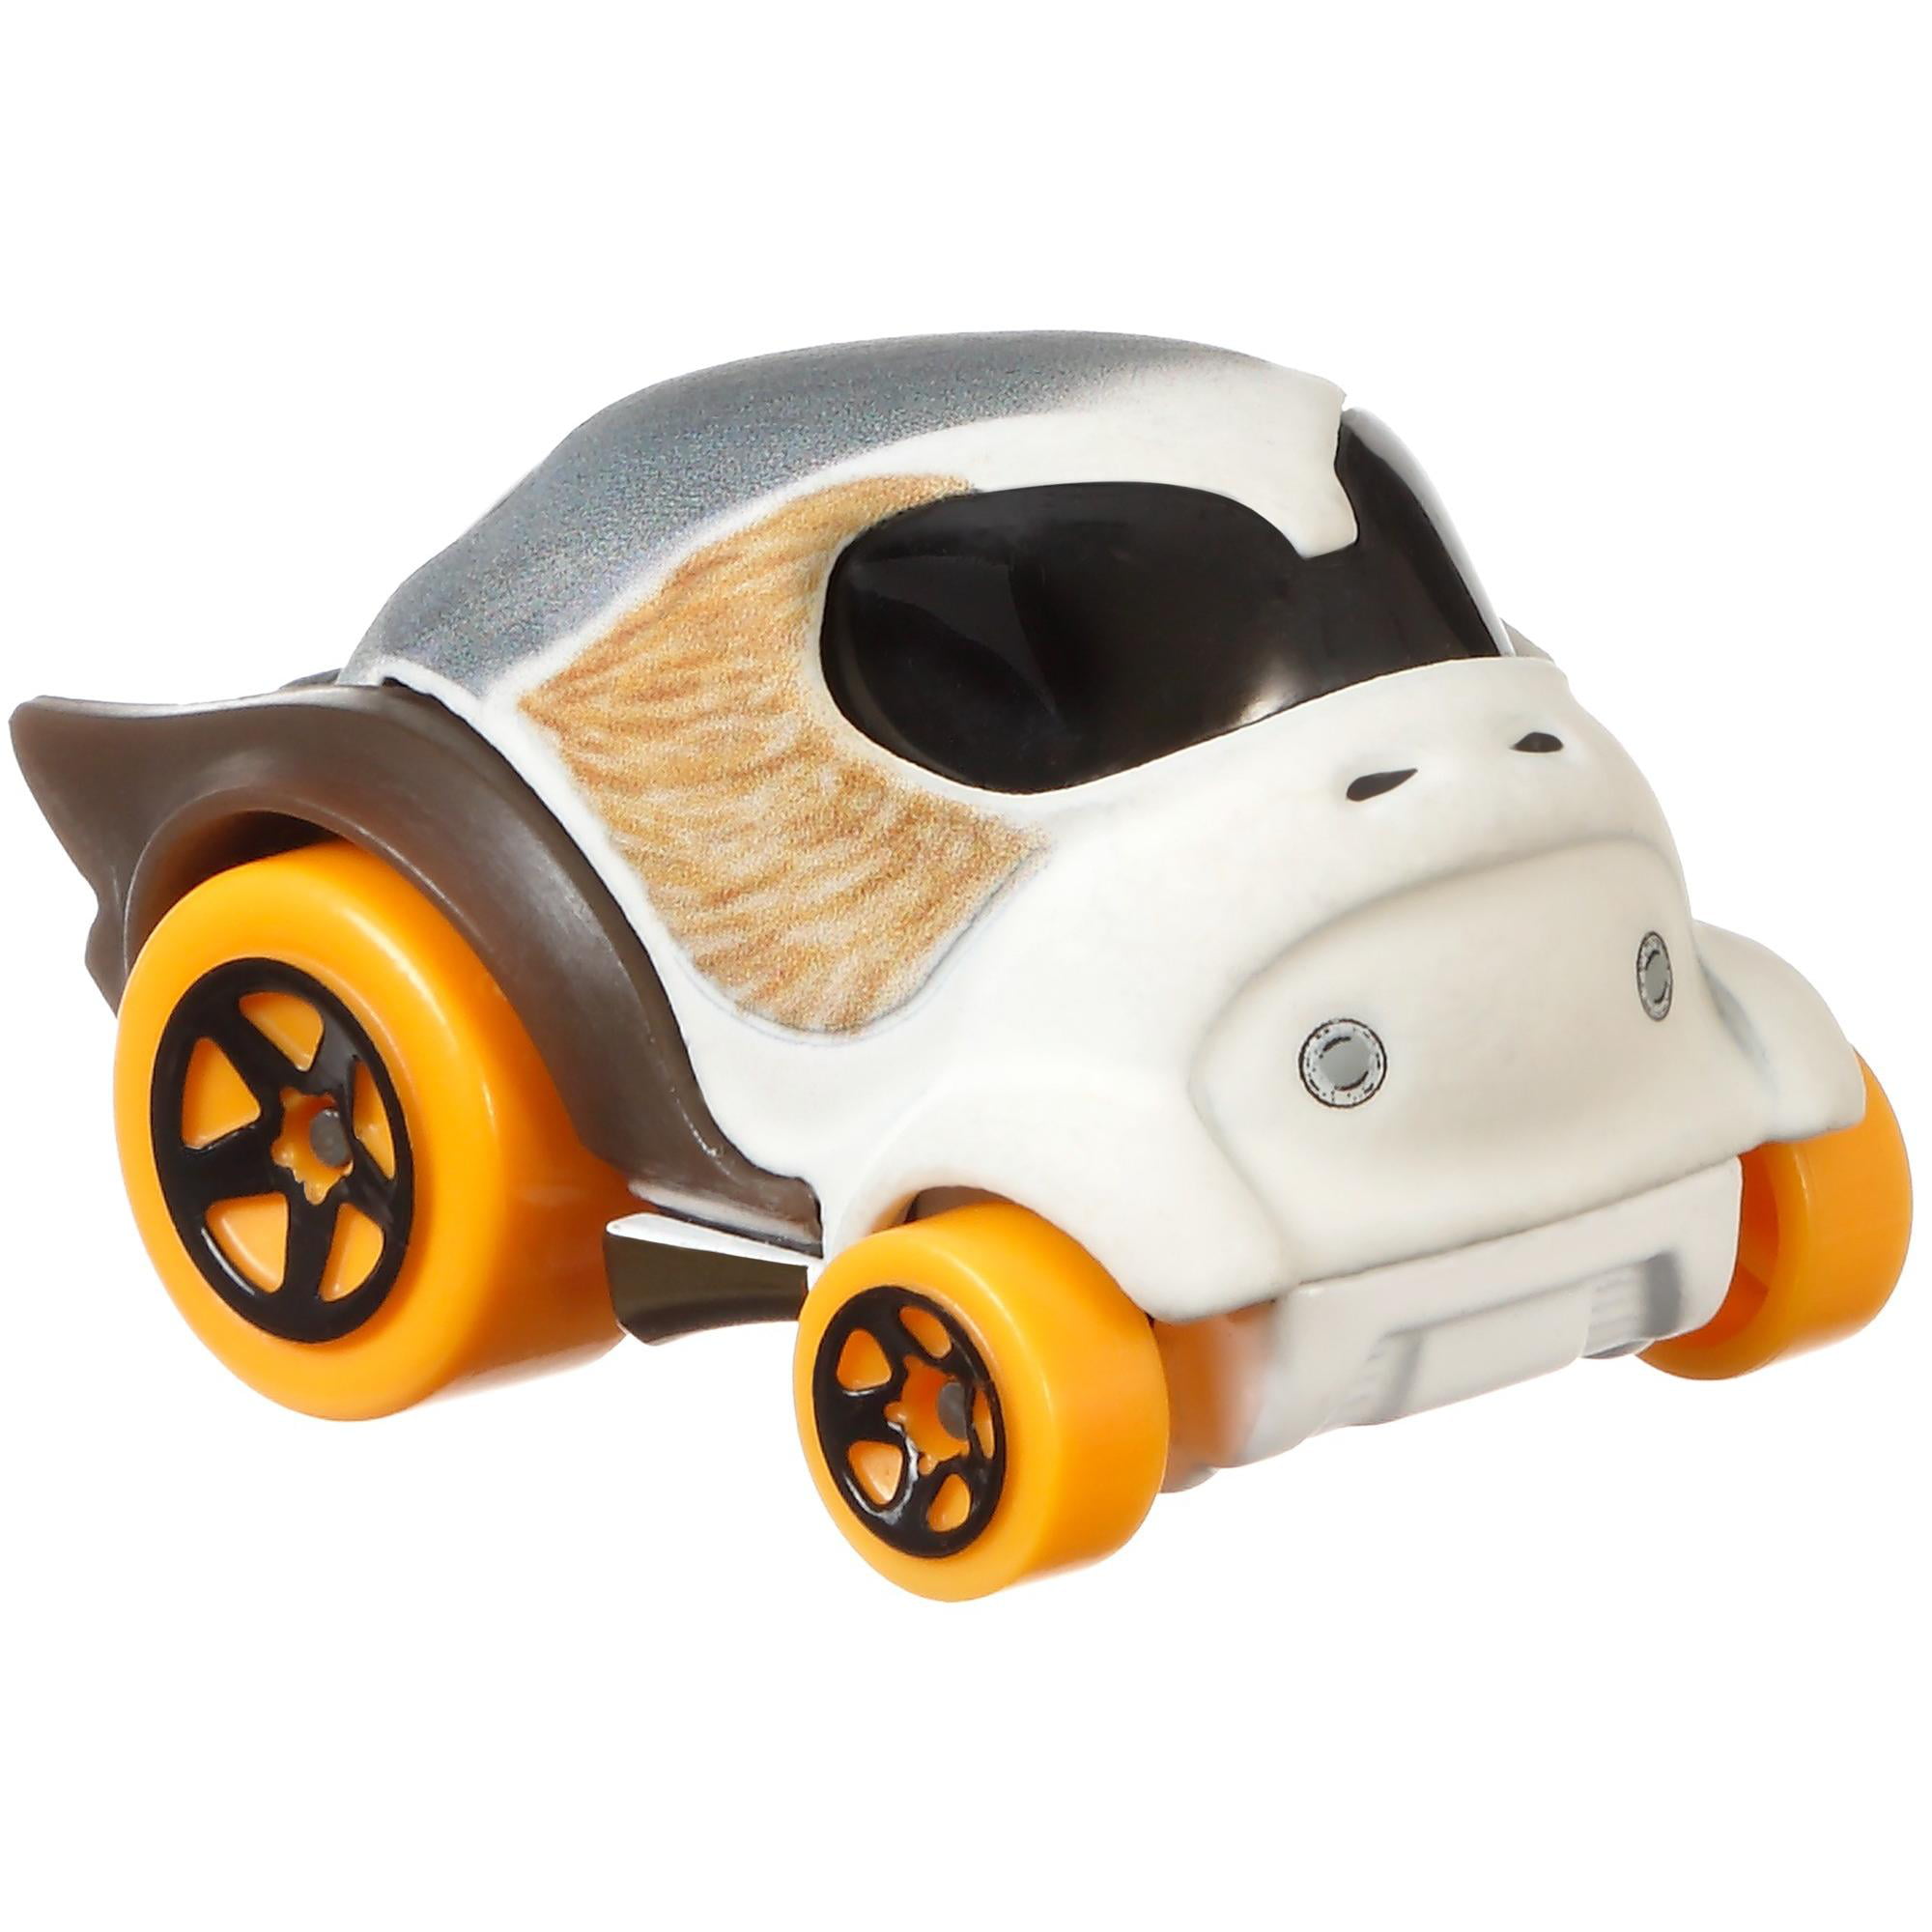 Star Wars character car The child